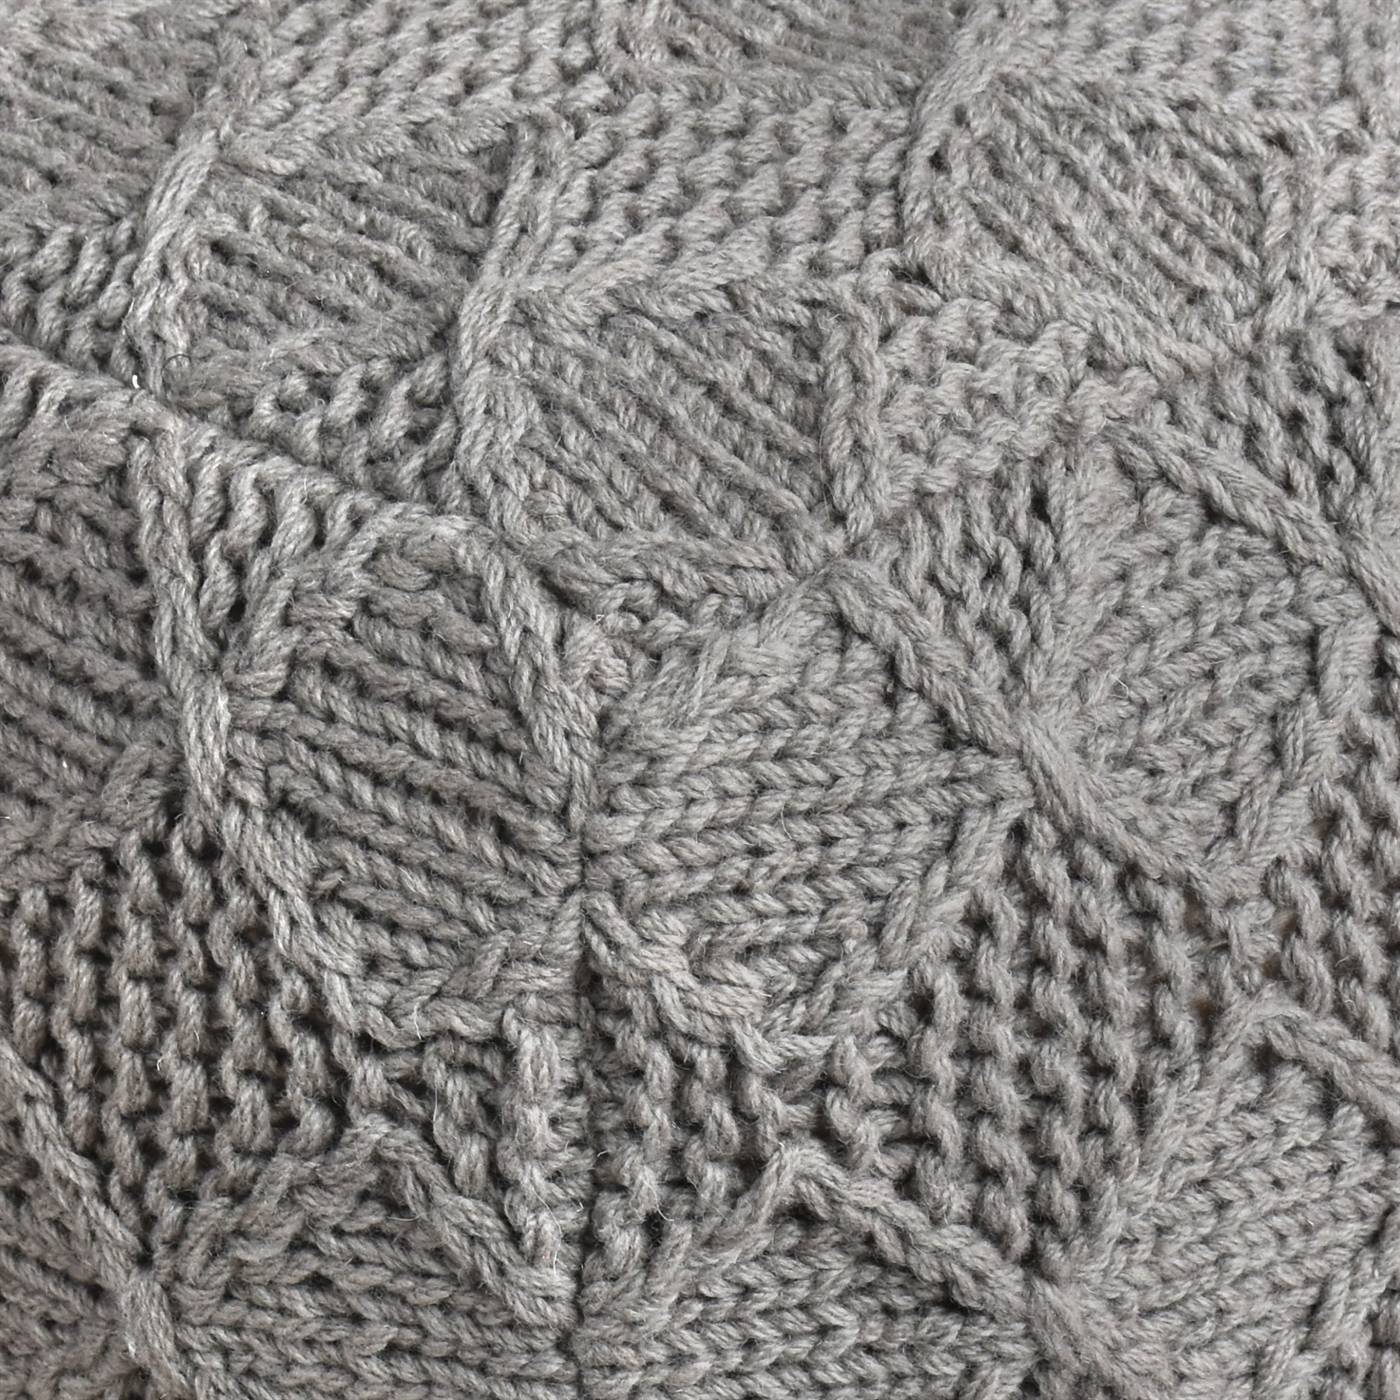 Kinzie Pouf, 40x40x40 cm, Grey, NZ Wool, Hand Knitted, Hm Knitted, Flat Weave